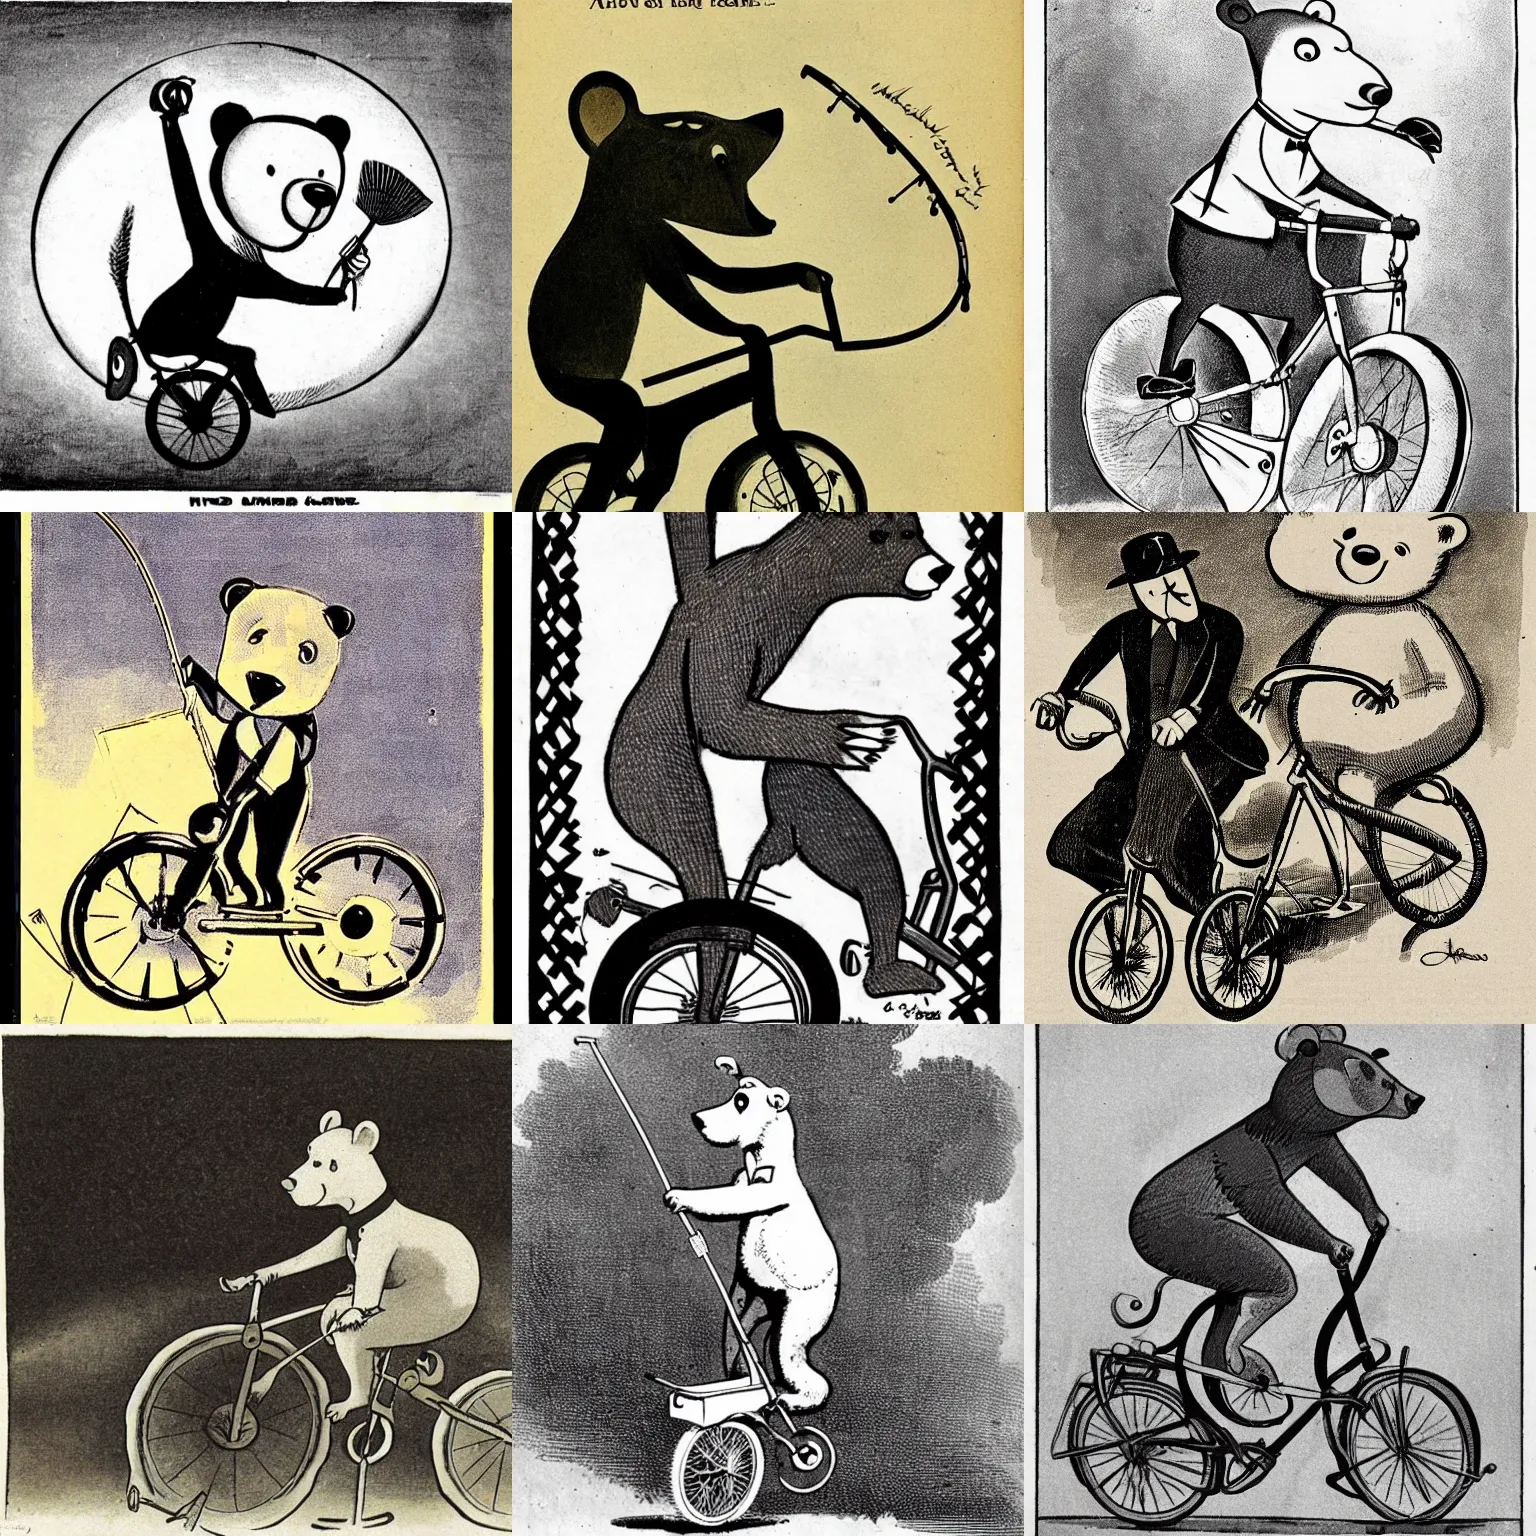 Prompt: a 1920s cartoon about a bear on a unicycle